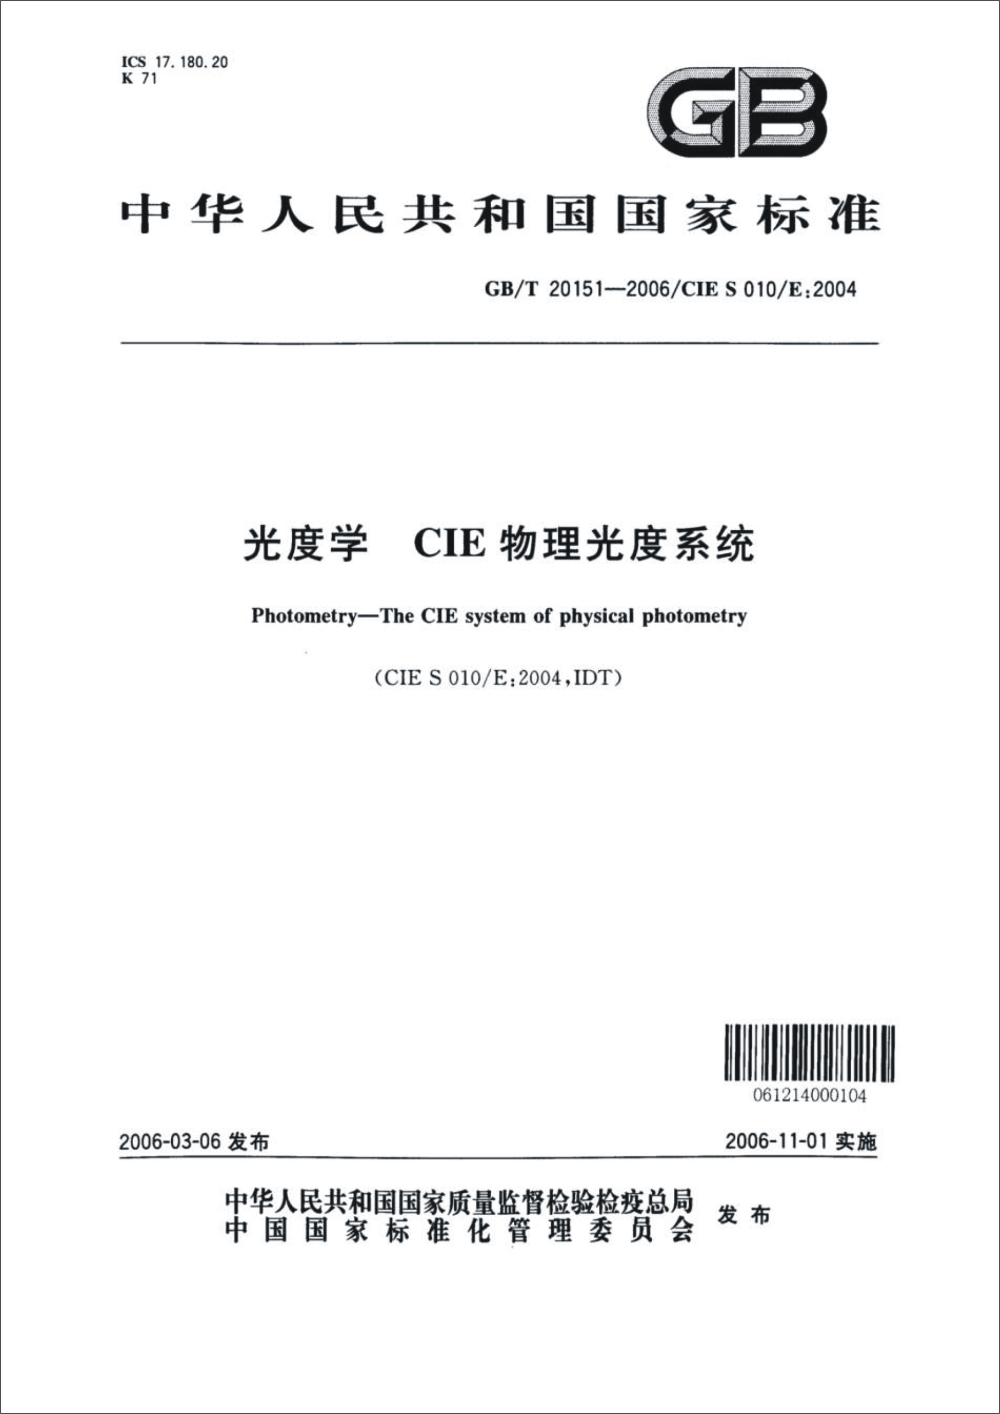 GB/T 20151-2006 《光度学 CIE物理光度系统》《Photometry - the CIE system of physical photometry》